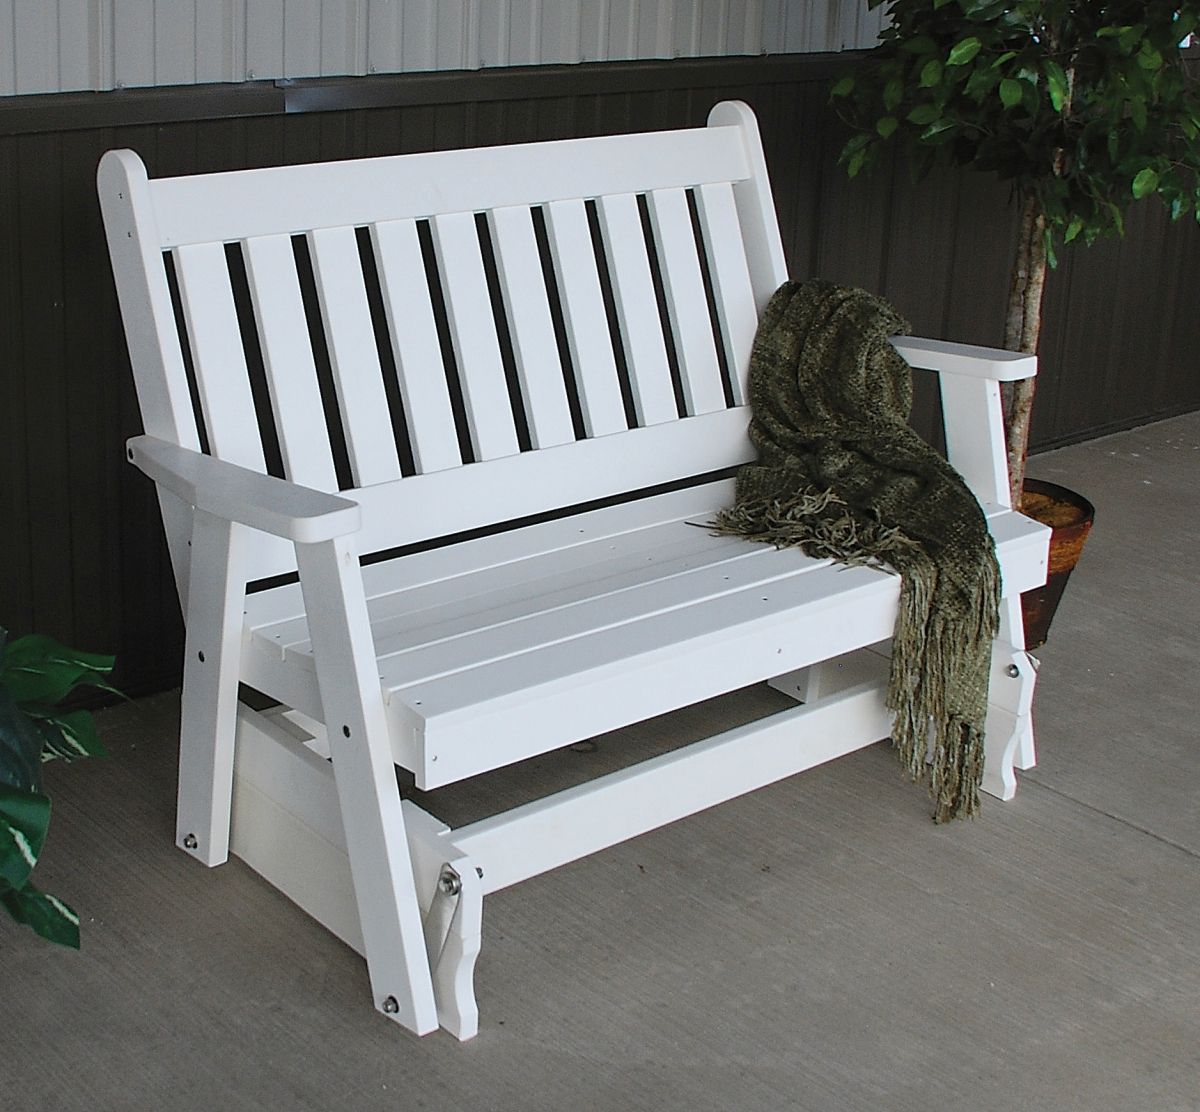 4′ Traditional English Gliding Bench » Amish Woodwork Pertaining To Traditional Glider Benches (View 19 of 25)